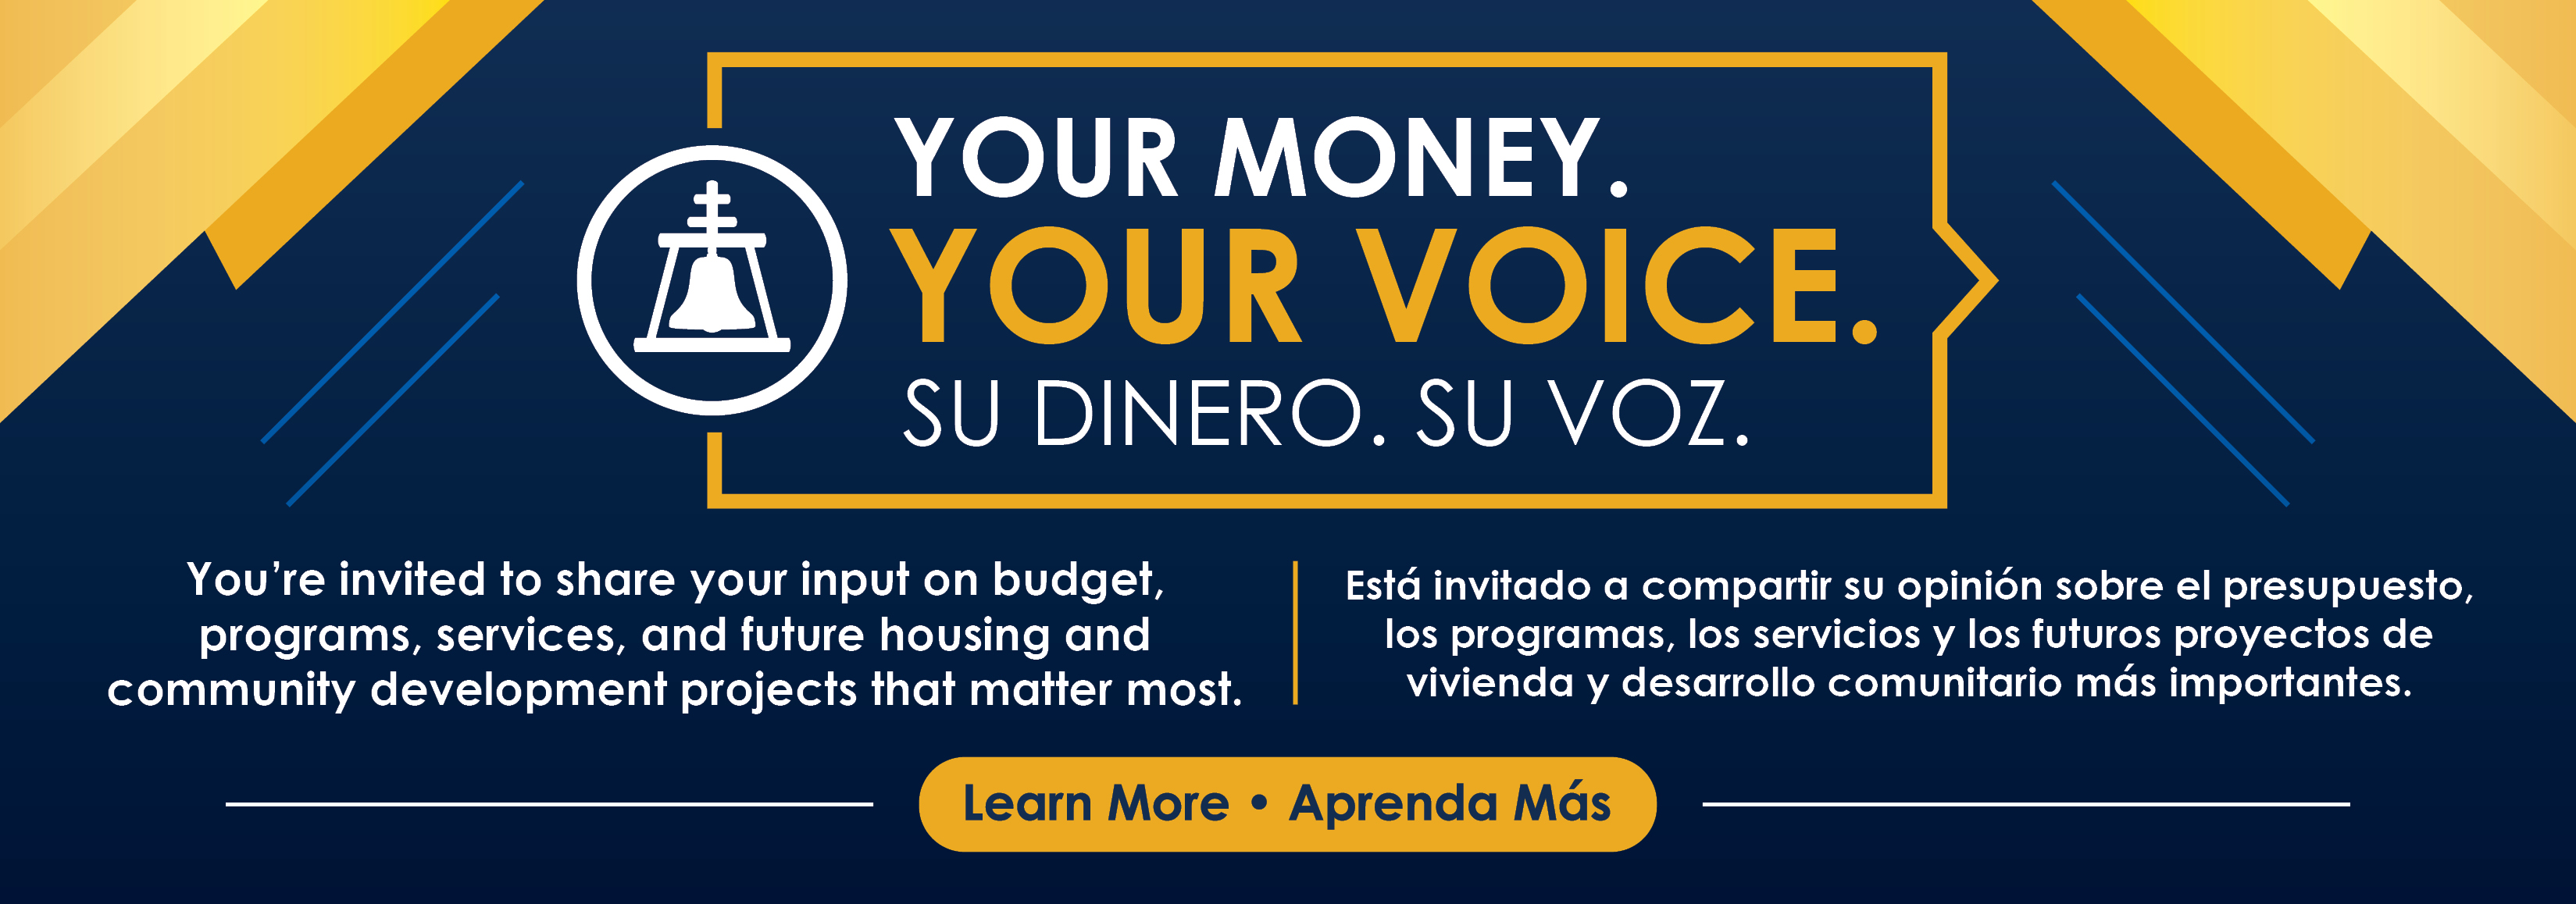 Your Money. Your Voice.